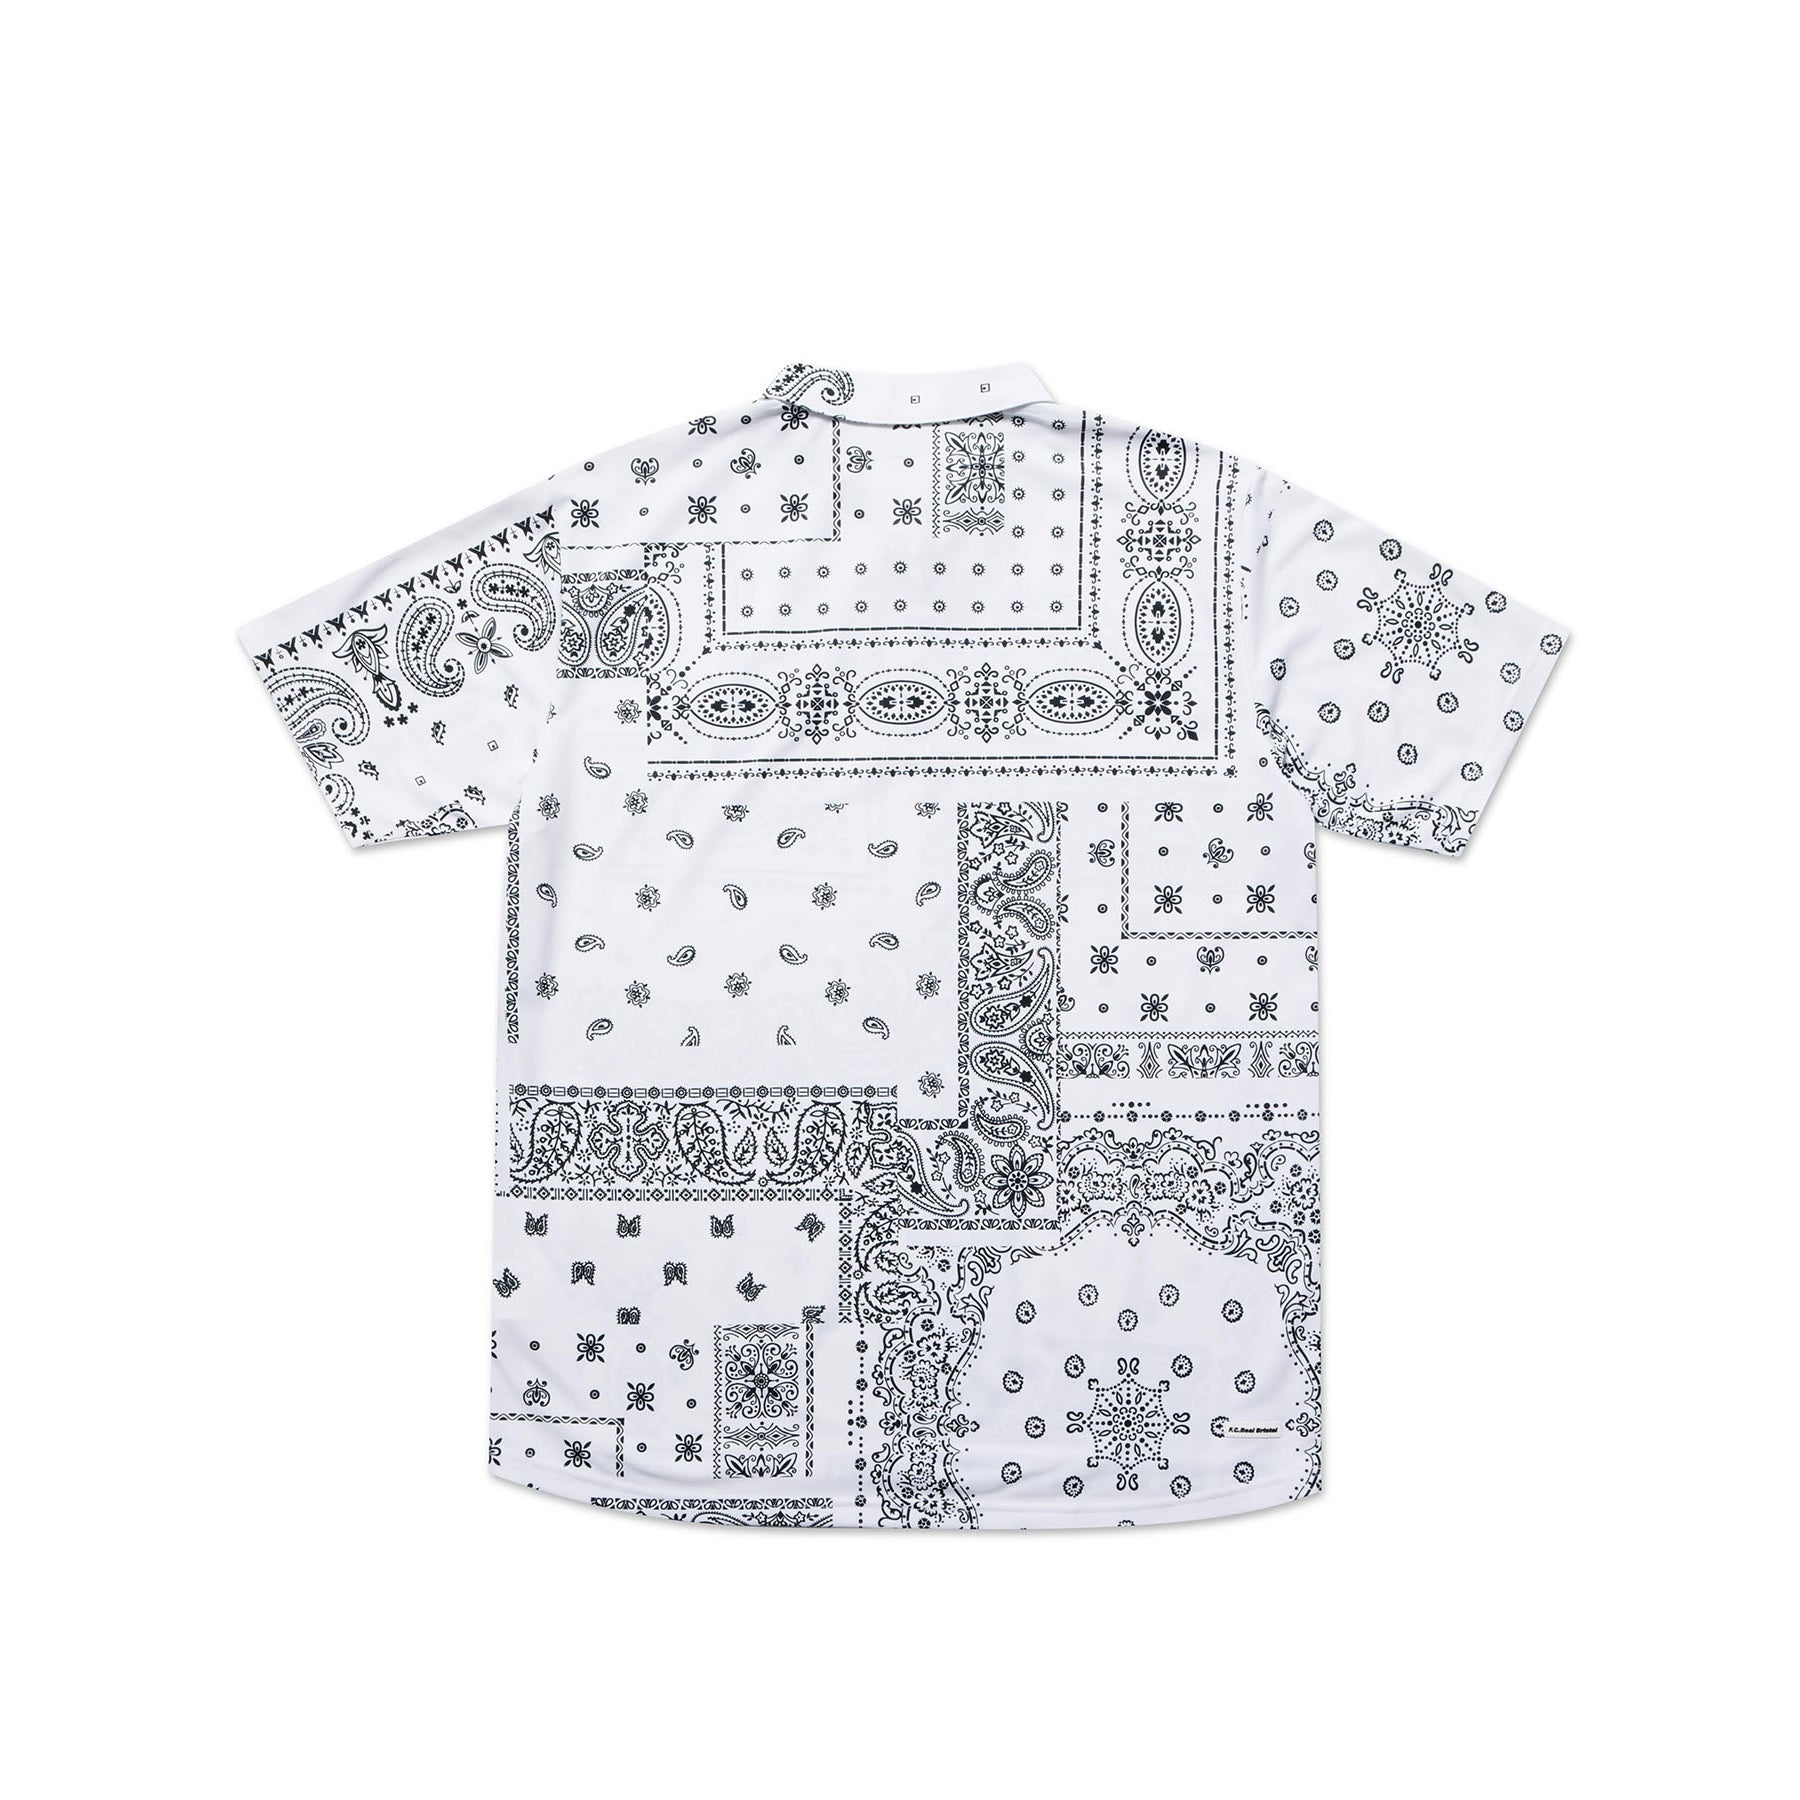 F.C.Real Bristol]WHOLE PATTERN S/S POLO(FCRB-230137) – R&Co.